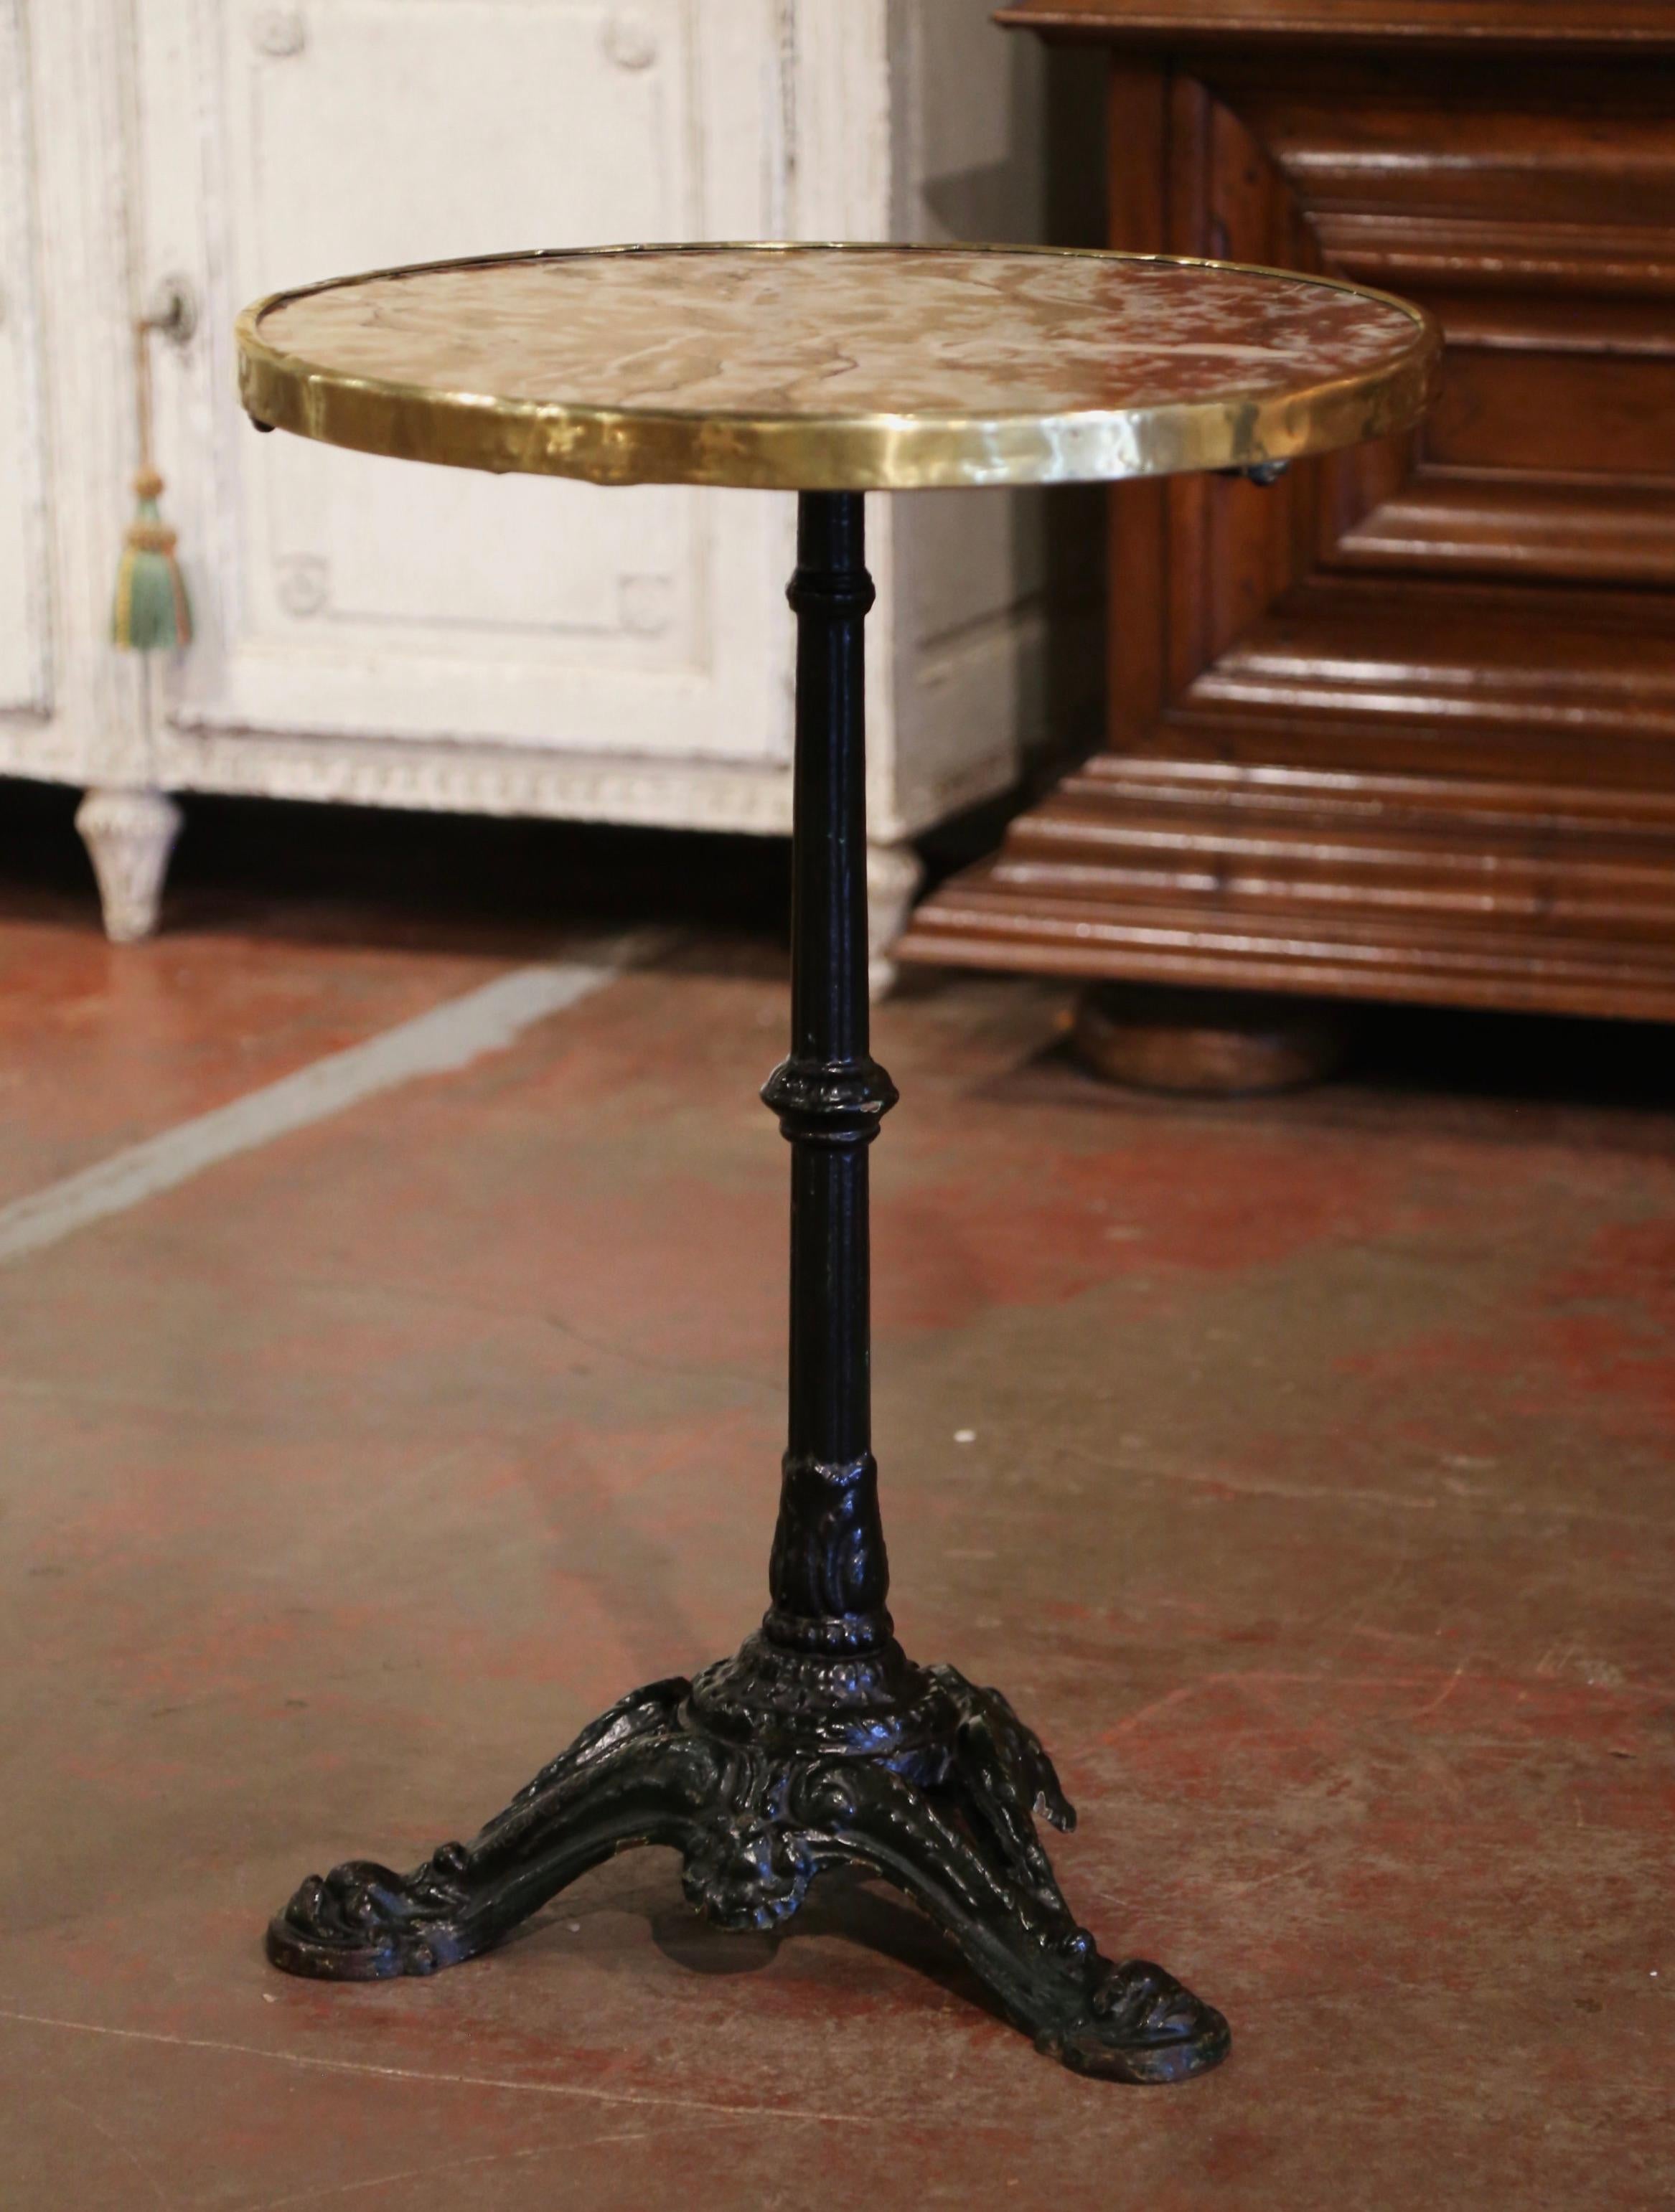 This exquisite, antique gueridon was crafted in Paris, France, circa 1870. The intricate base sits on three paw feet decorated over a carved stem embellished with acanthus leaf motifs. The Classic bistrot table is dressed with the original